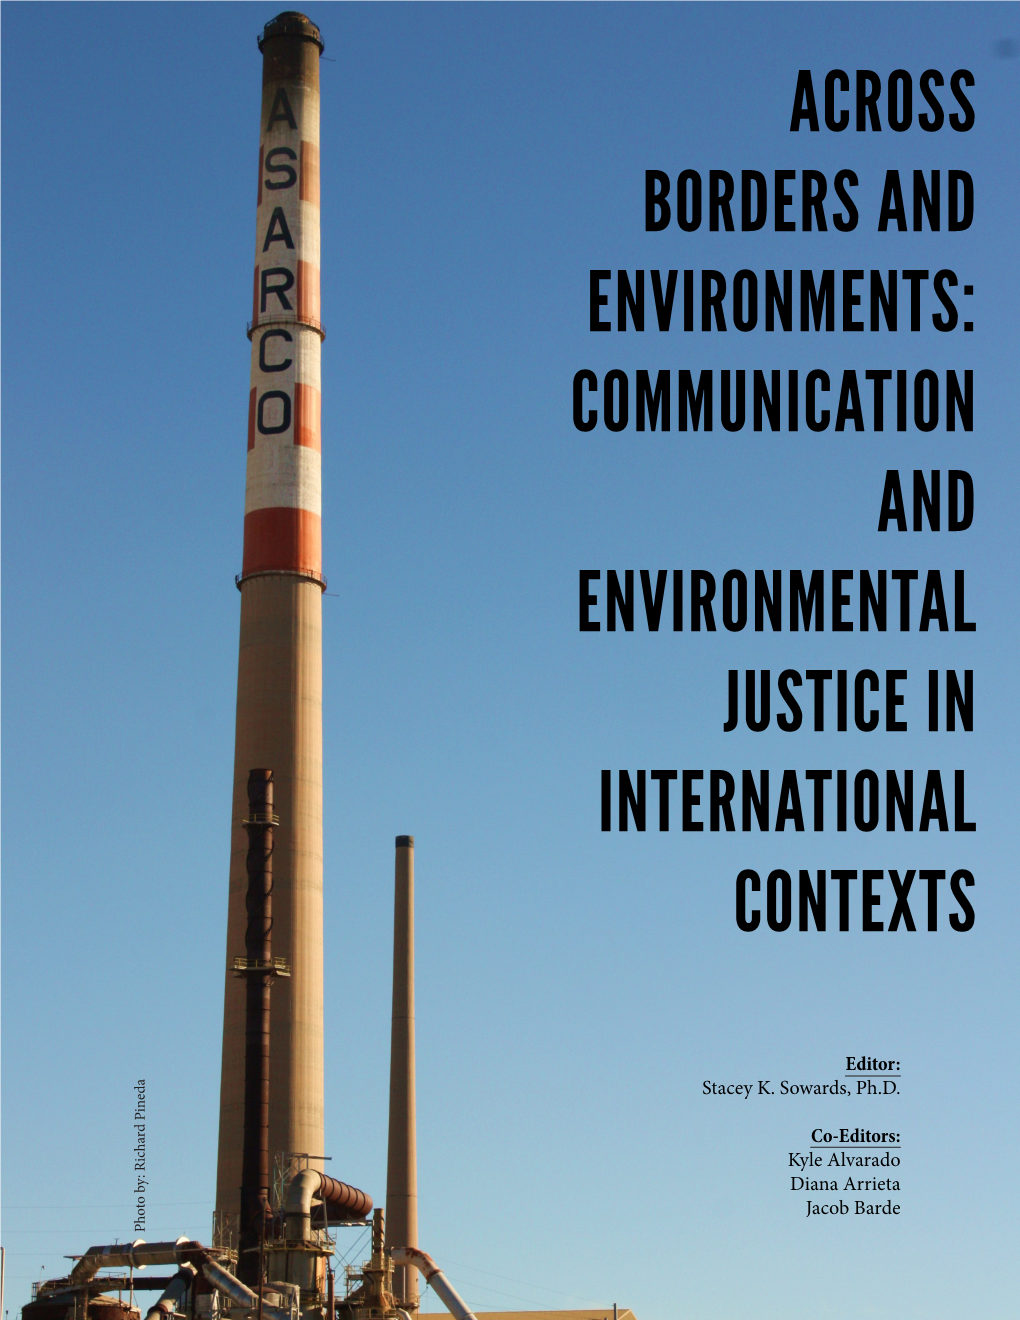 Across Borders and Environments: Communication and Environmental Justice in International Contexts